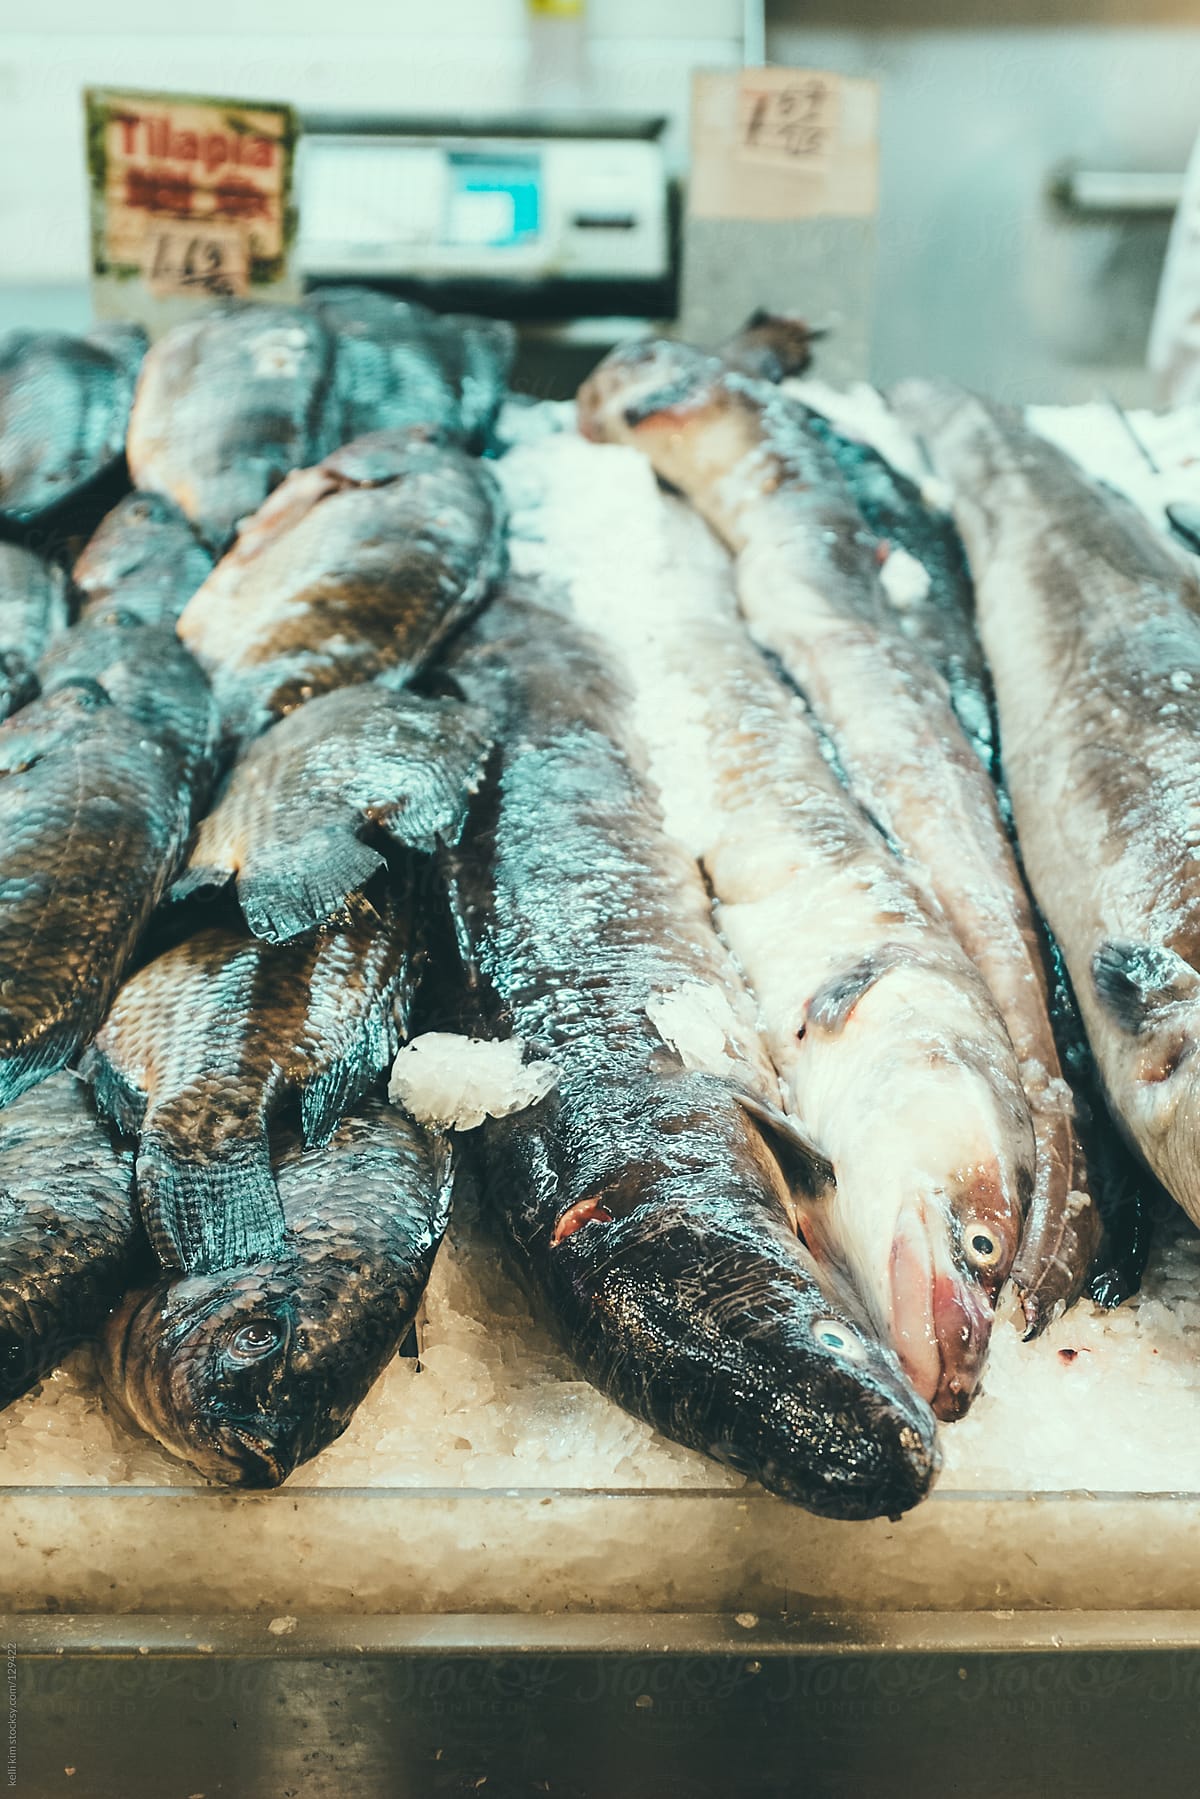 Raw eel for sale at Asian fish market